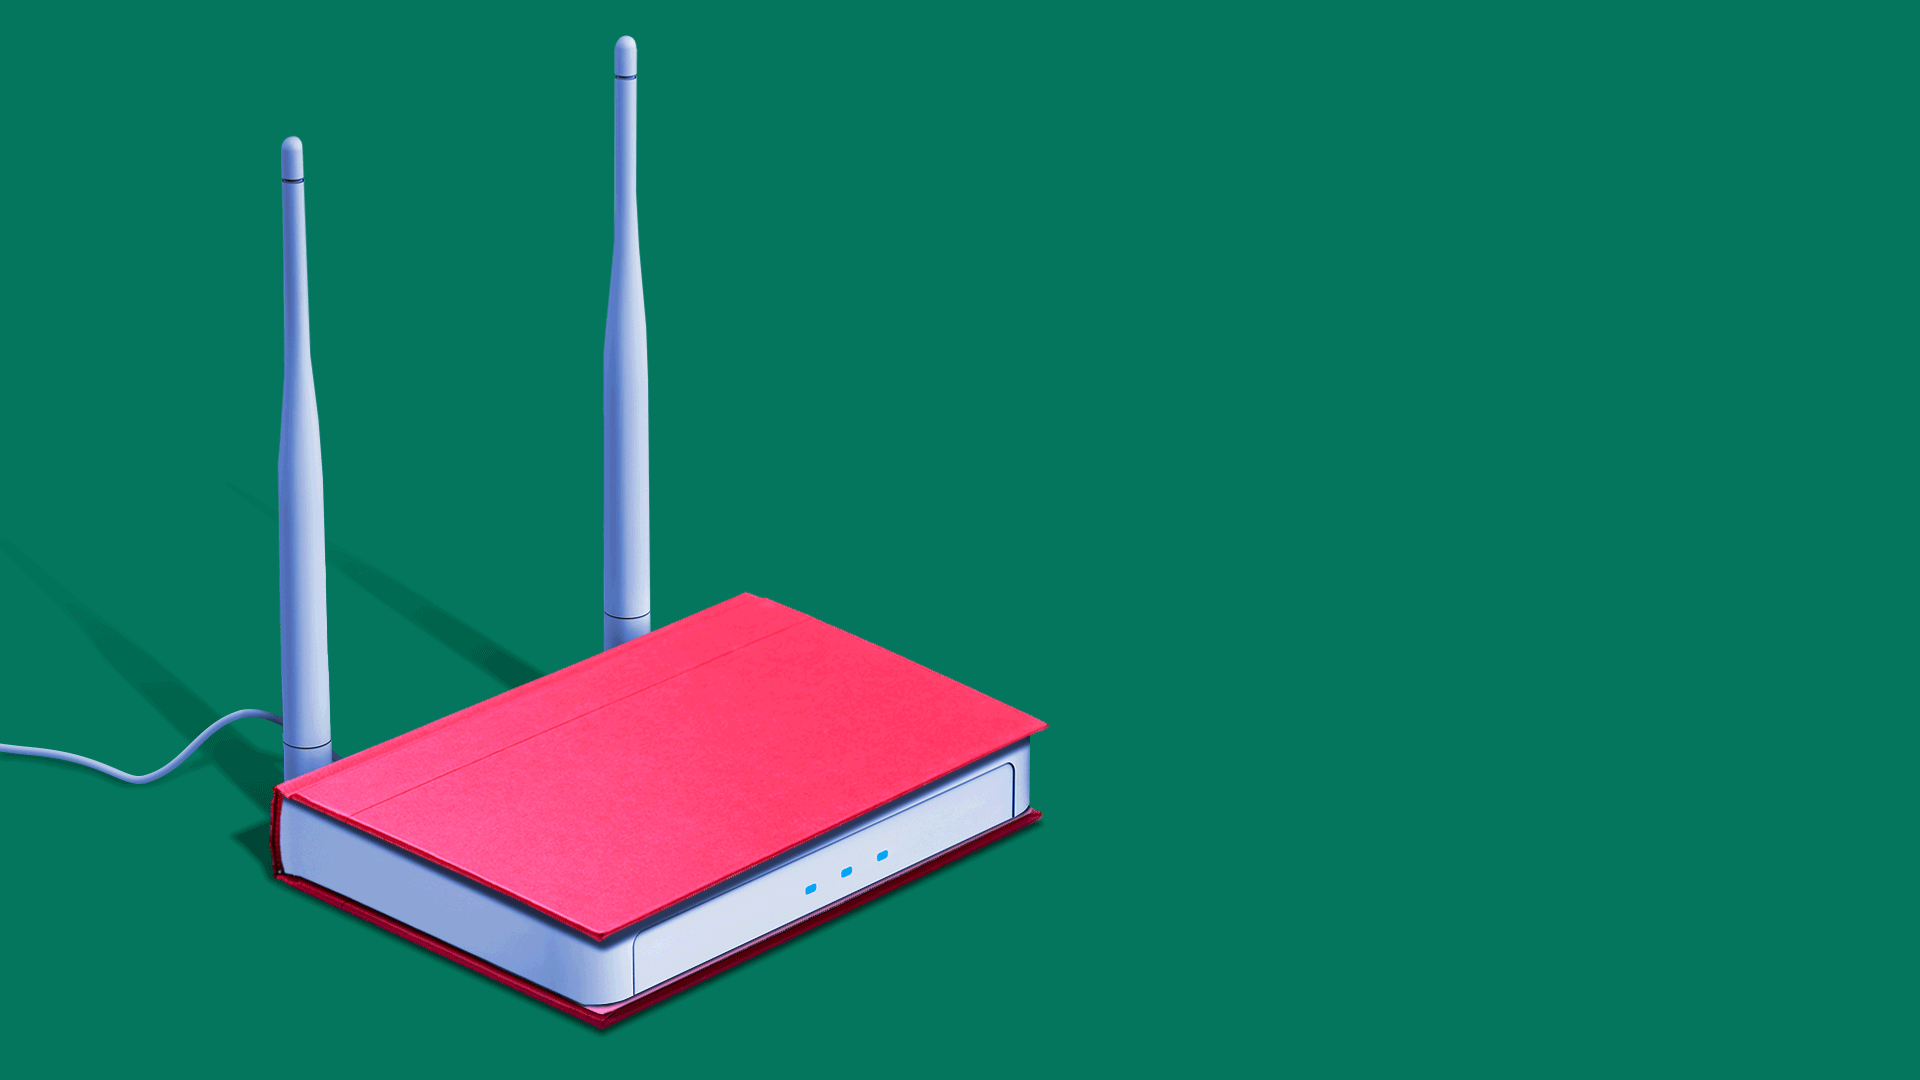 Animated gif of an internet router with a textbook cover on it